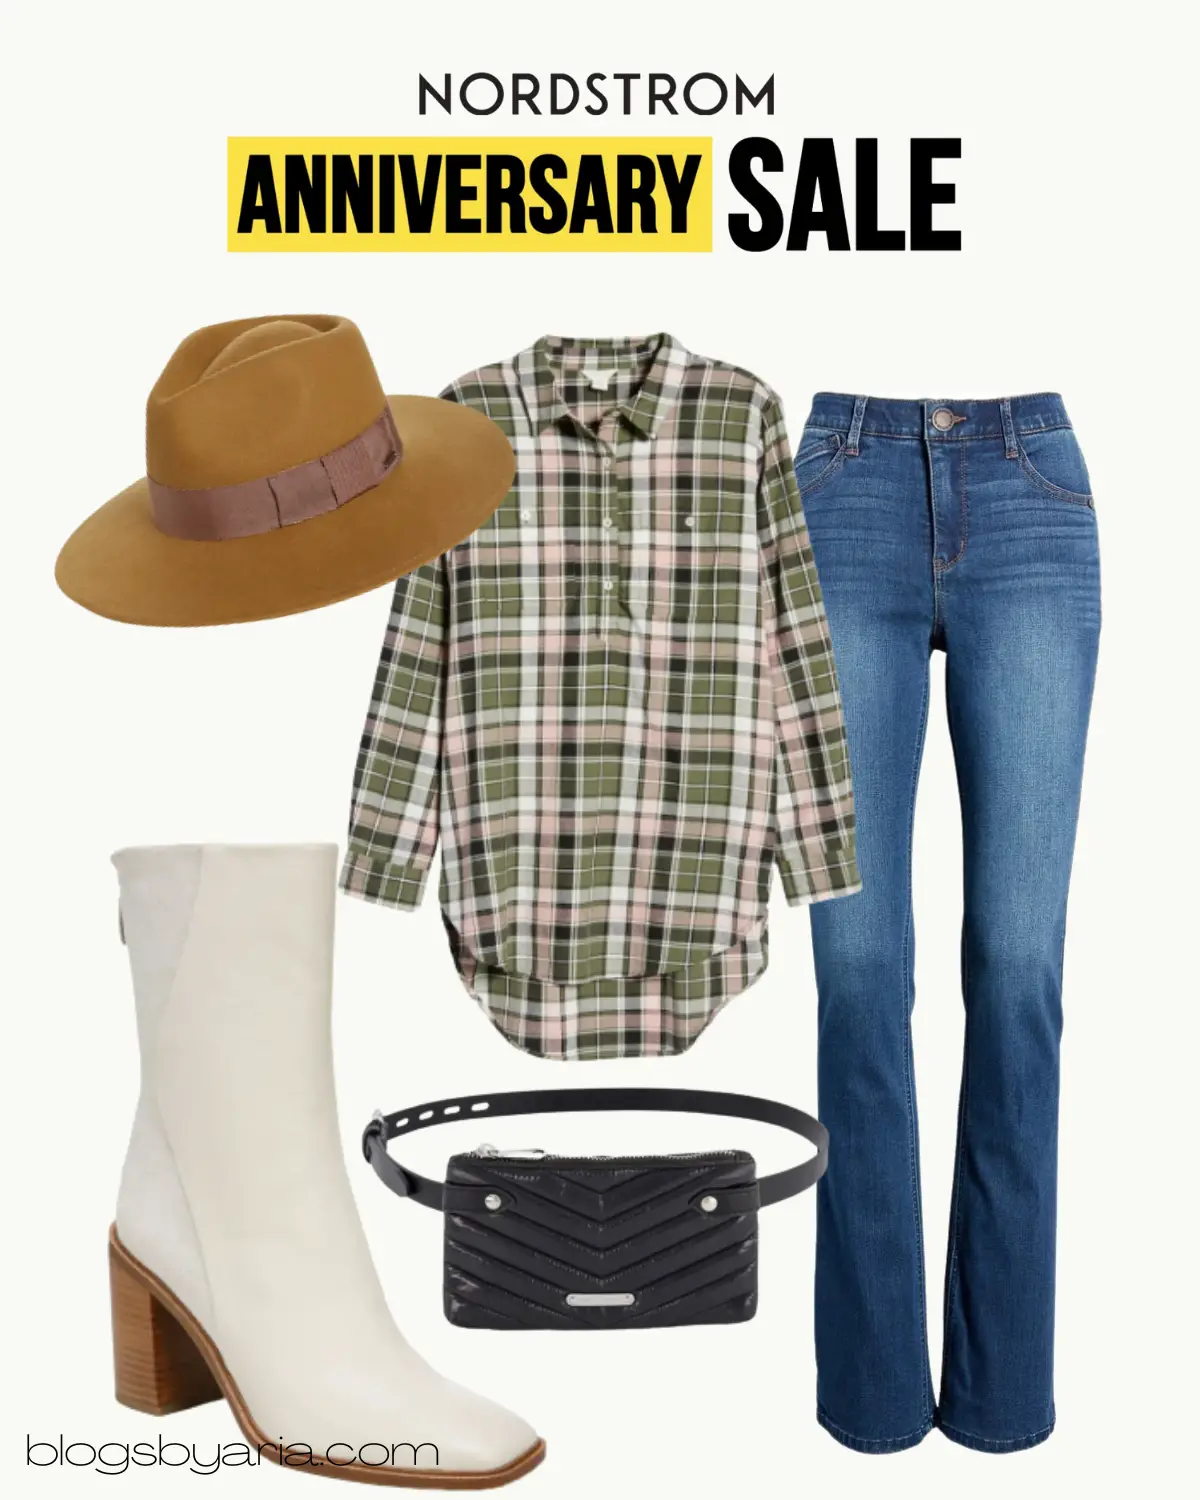 Nordstrom Anniversary Sale _outfit ideas